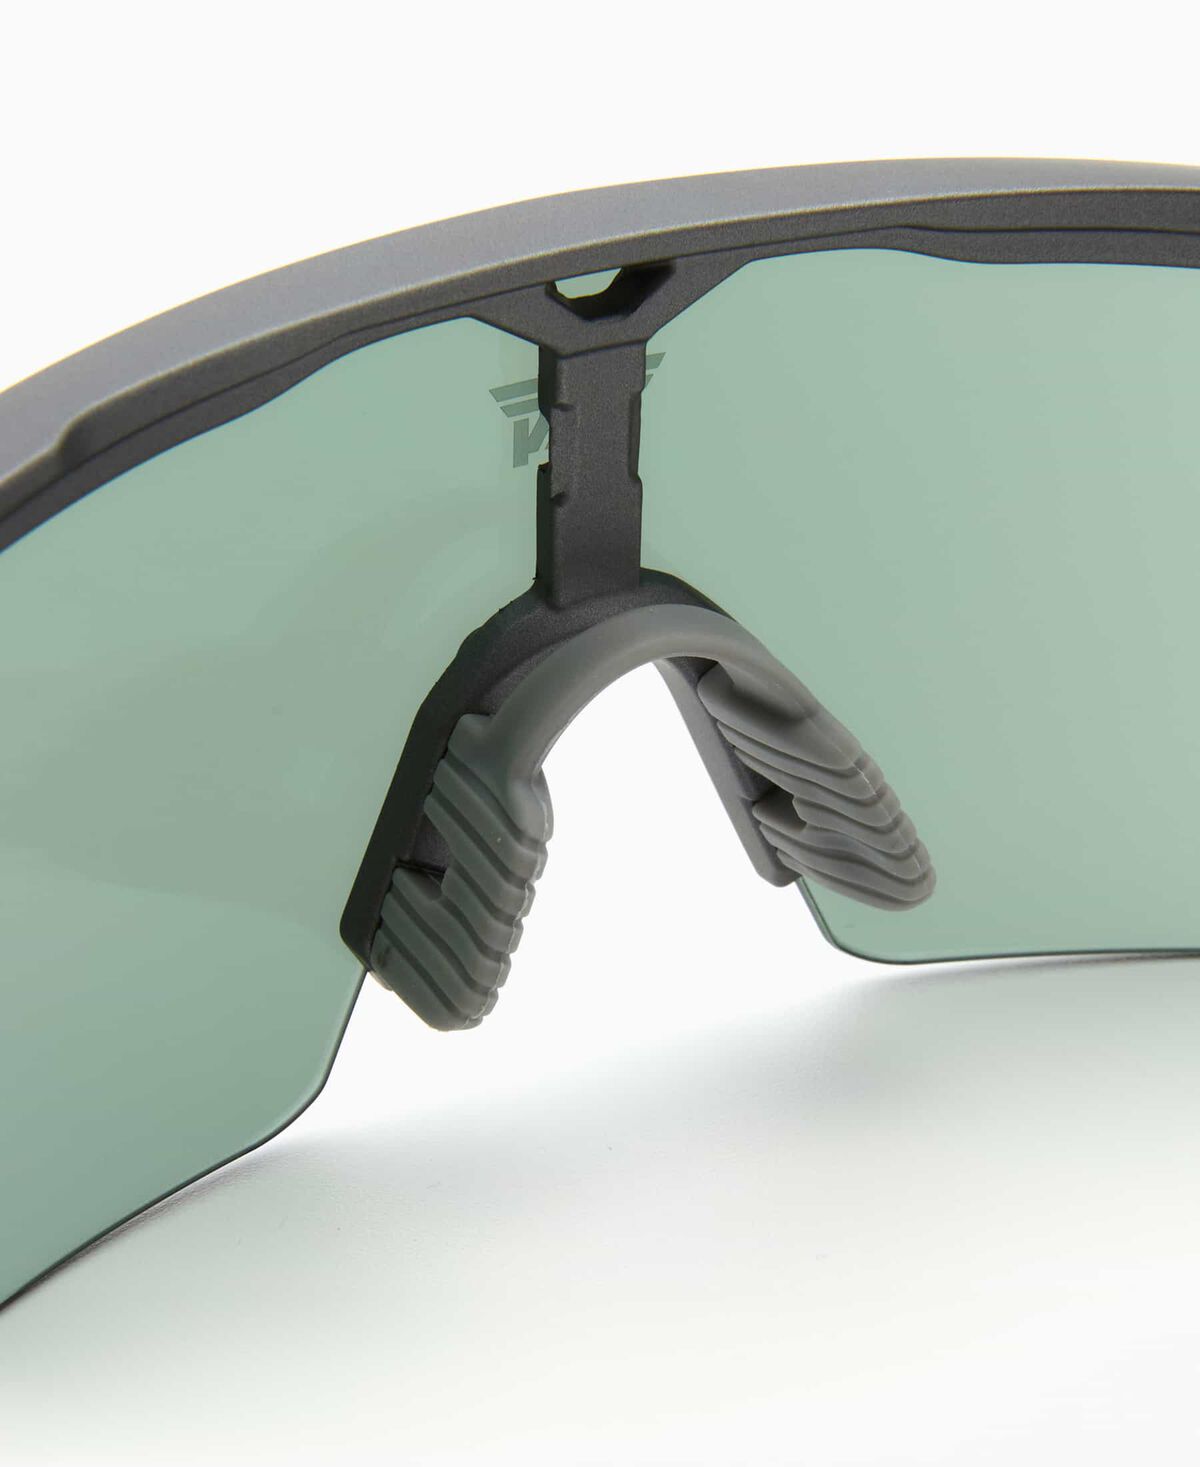 Unisex Grilamid Sports Goggles 